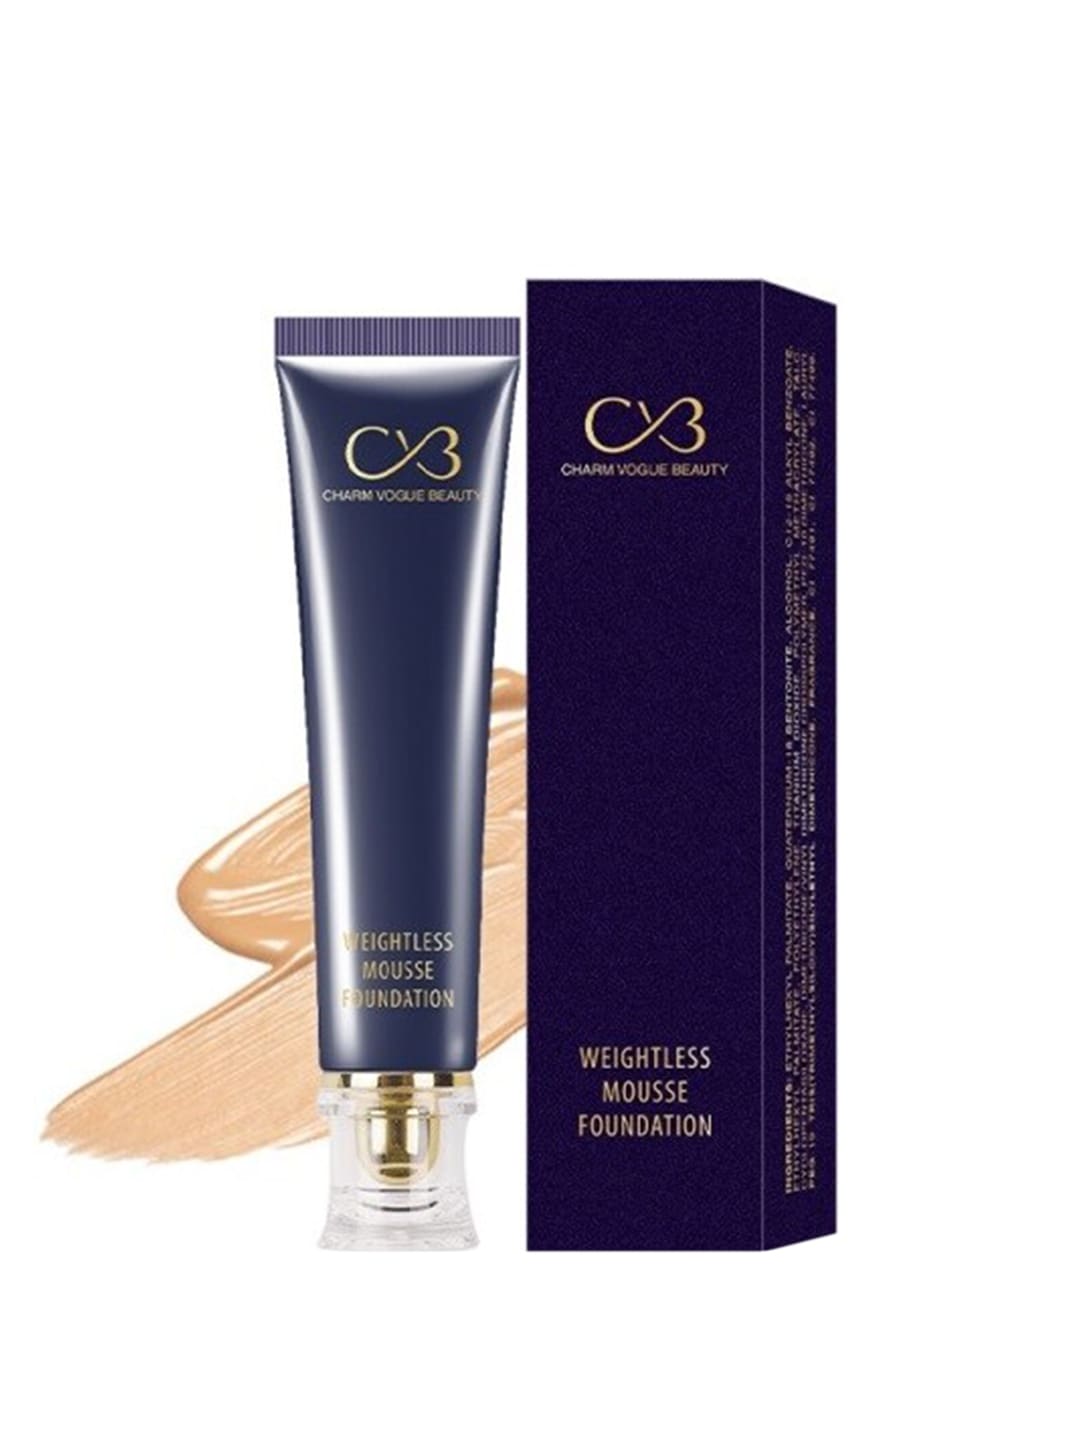 CVB Weightless Mousse Foundation - Natural Nude 04 Price in India